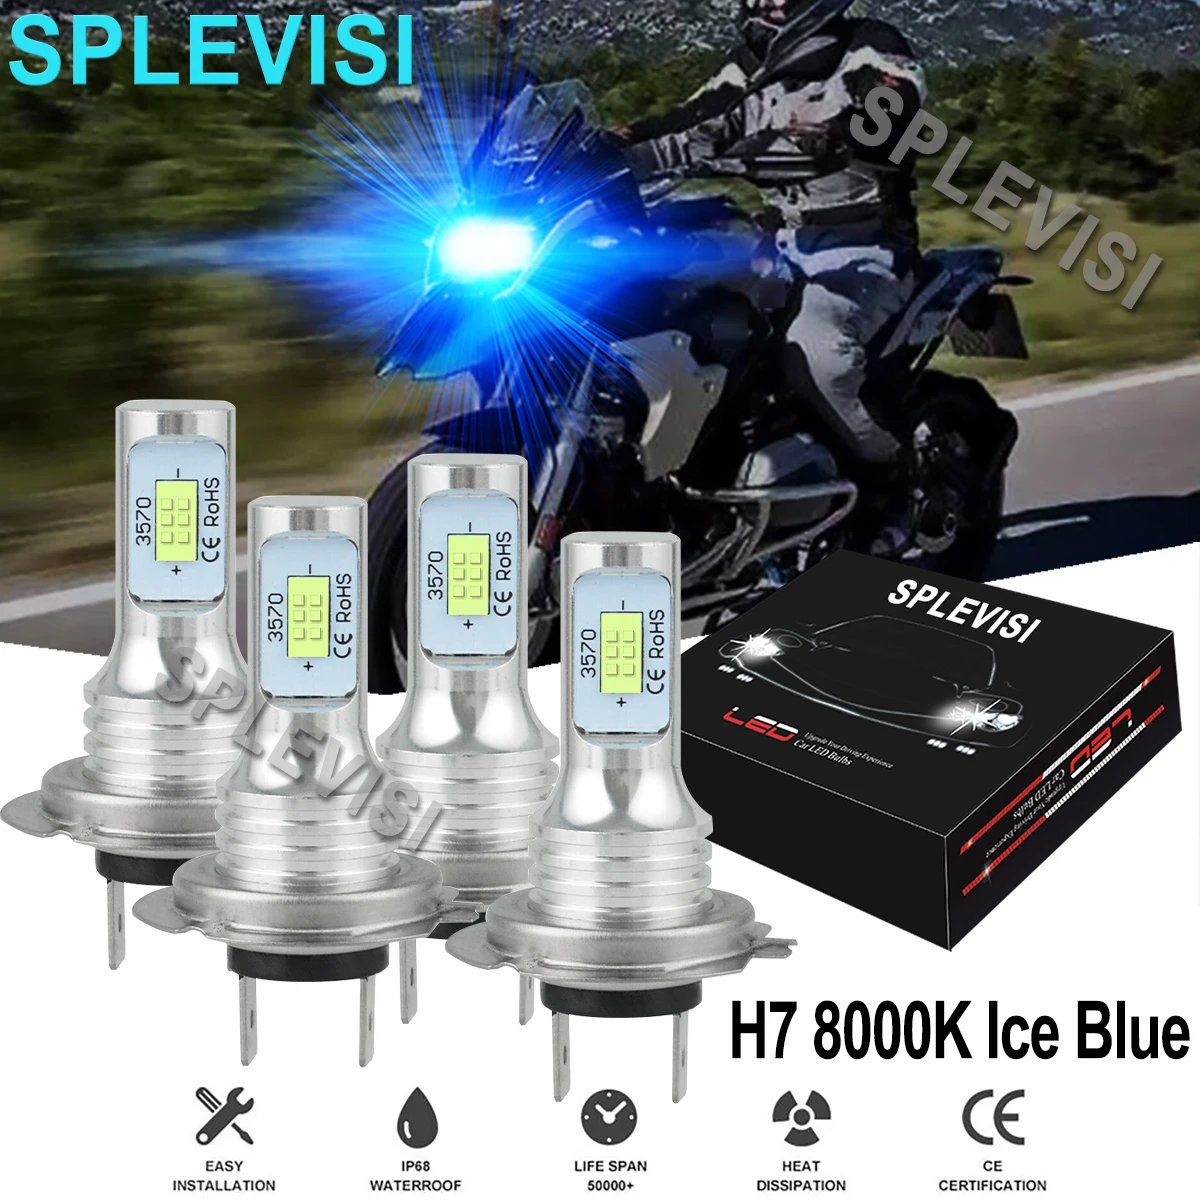 

4x140W 8000K Ice Blue Motorcycle LED Headlight For BMW C600 Sport 2014-2016 C650GT 2014-2019 F700GS 2014-2018 F800GS 2014-2018